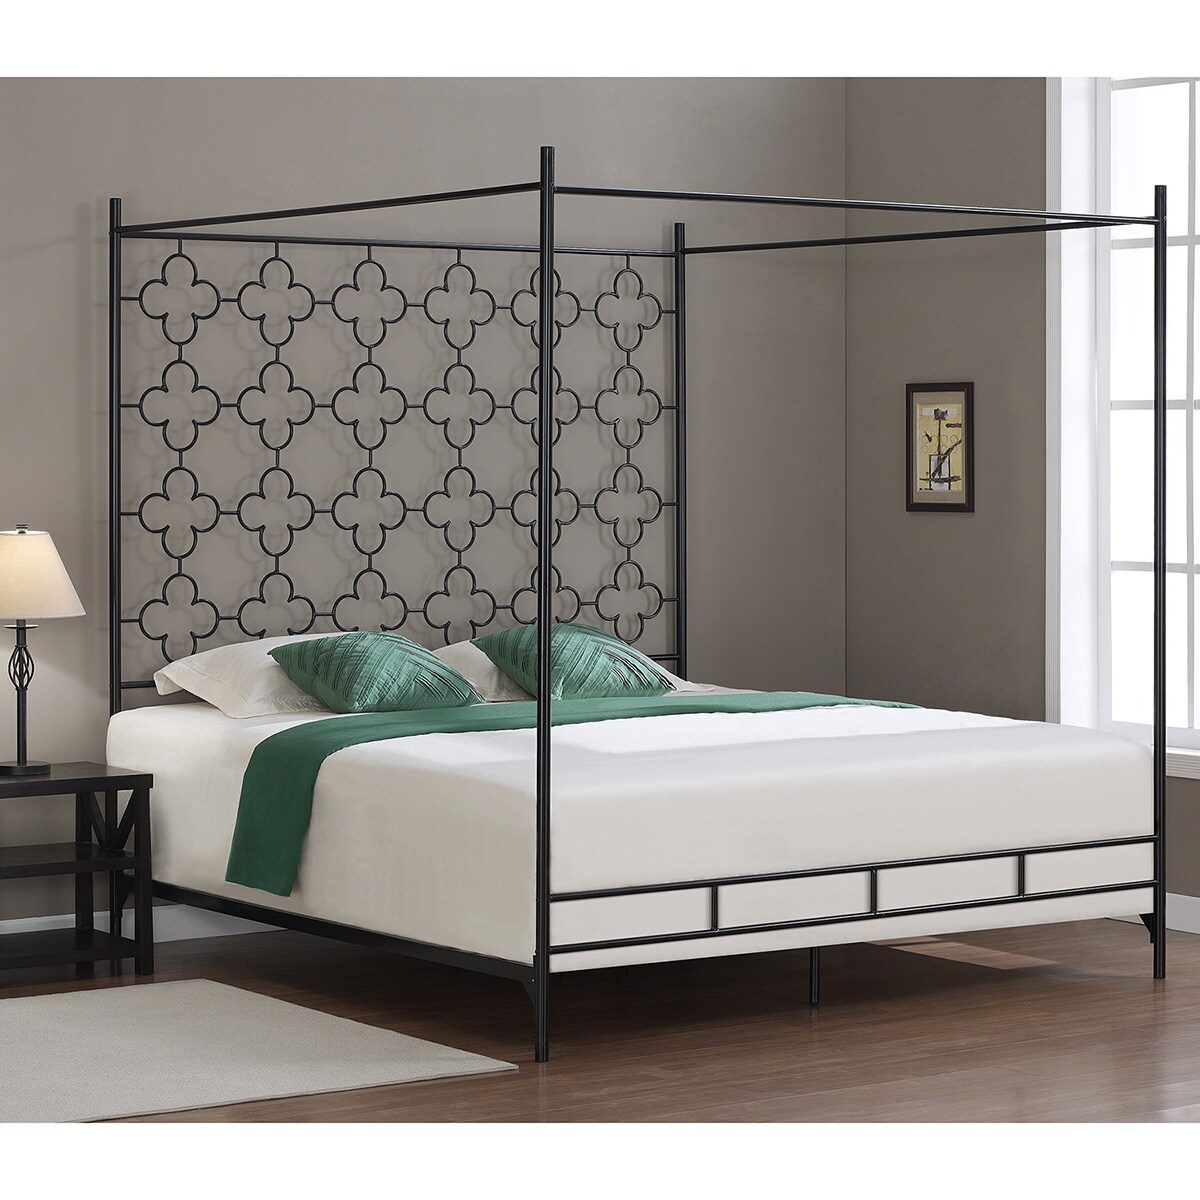 Quatrafoil King Canopy Bed   Shopping Beds